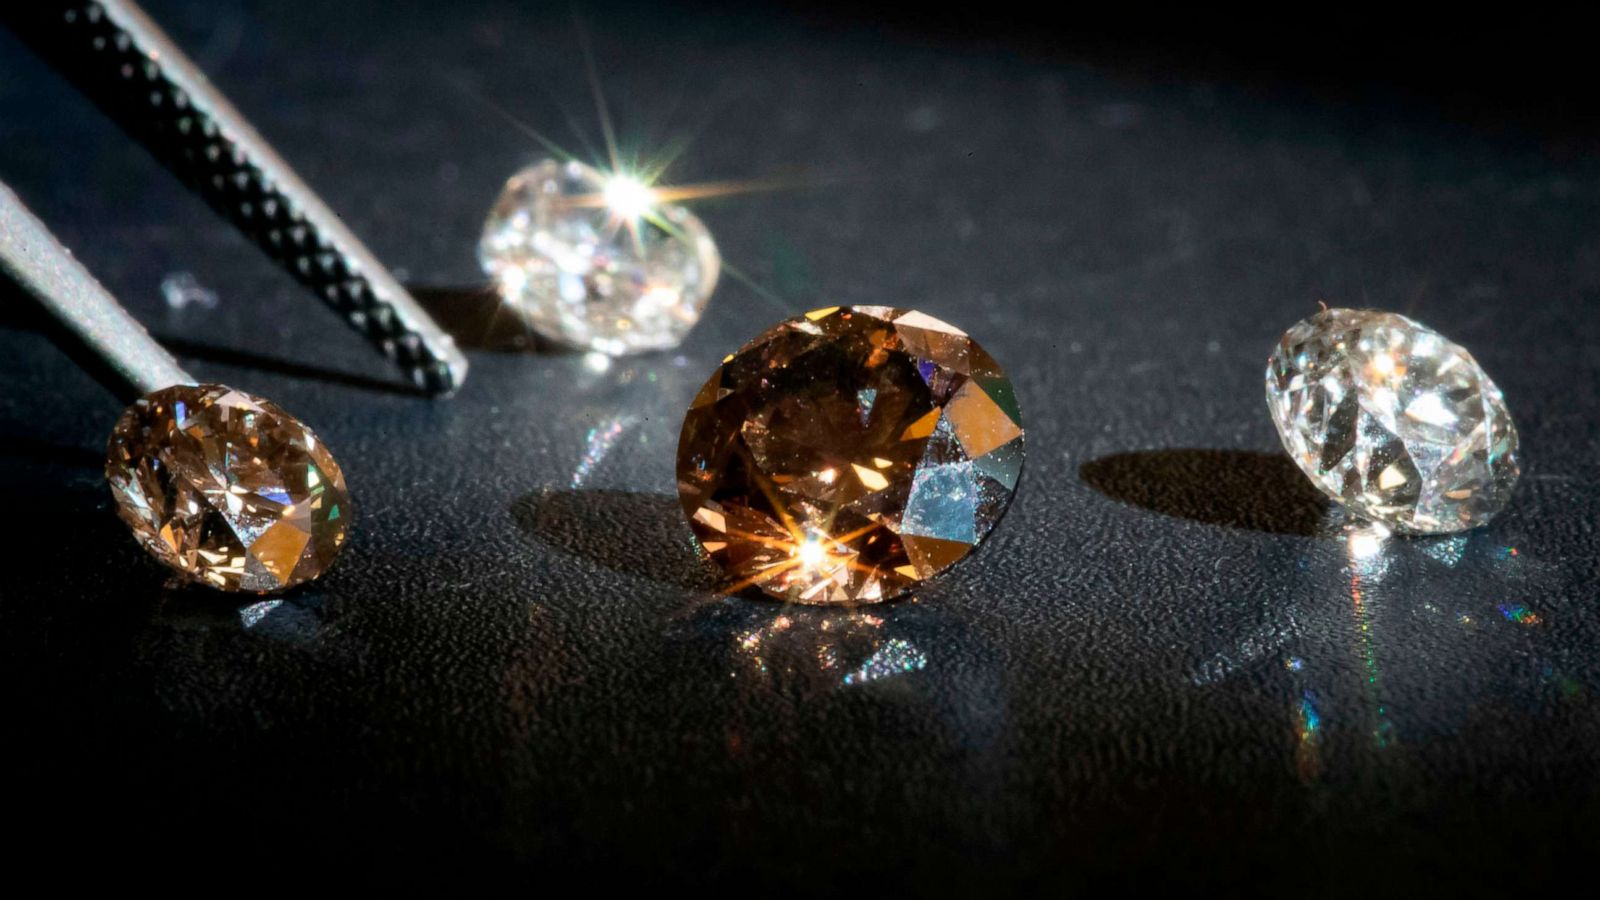 Companies must not profit from blood diamonds